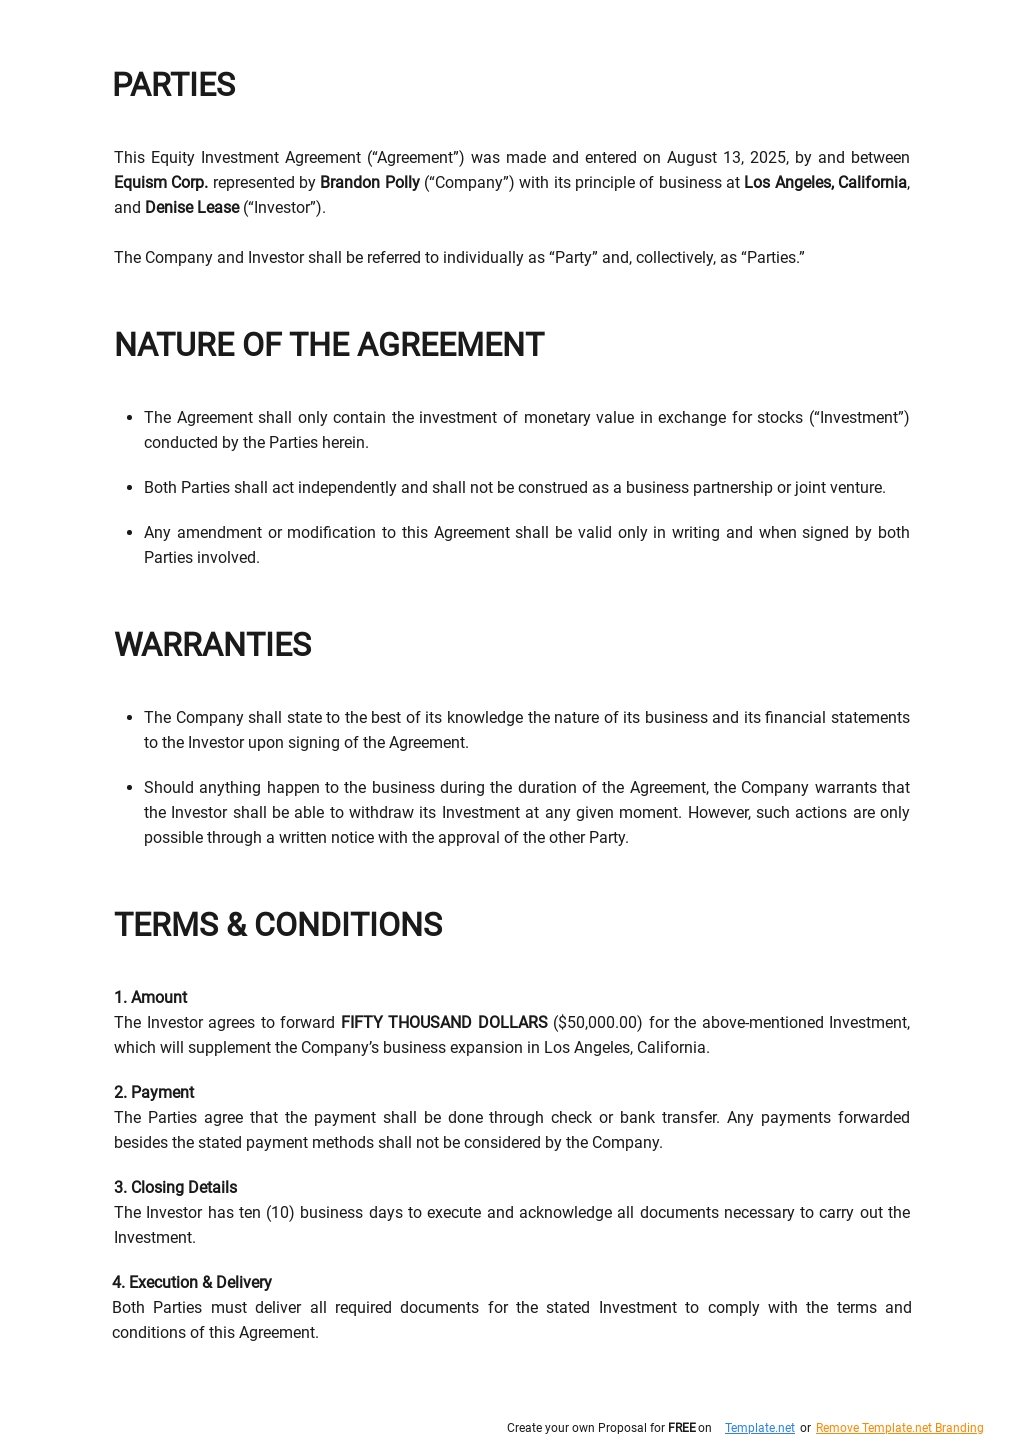 equity-investment-agreement-template-in-google-docs-word-template